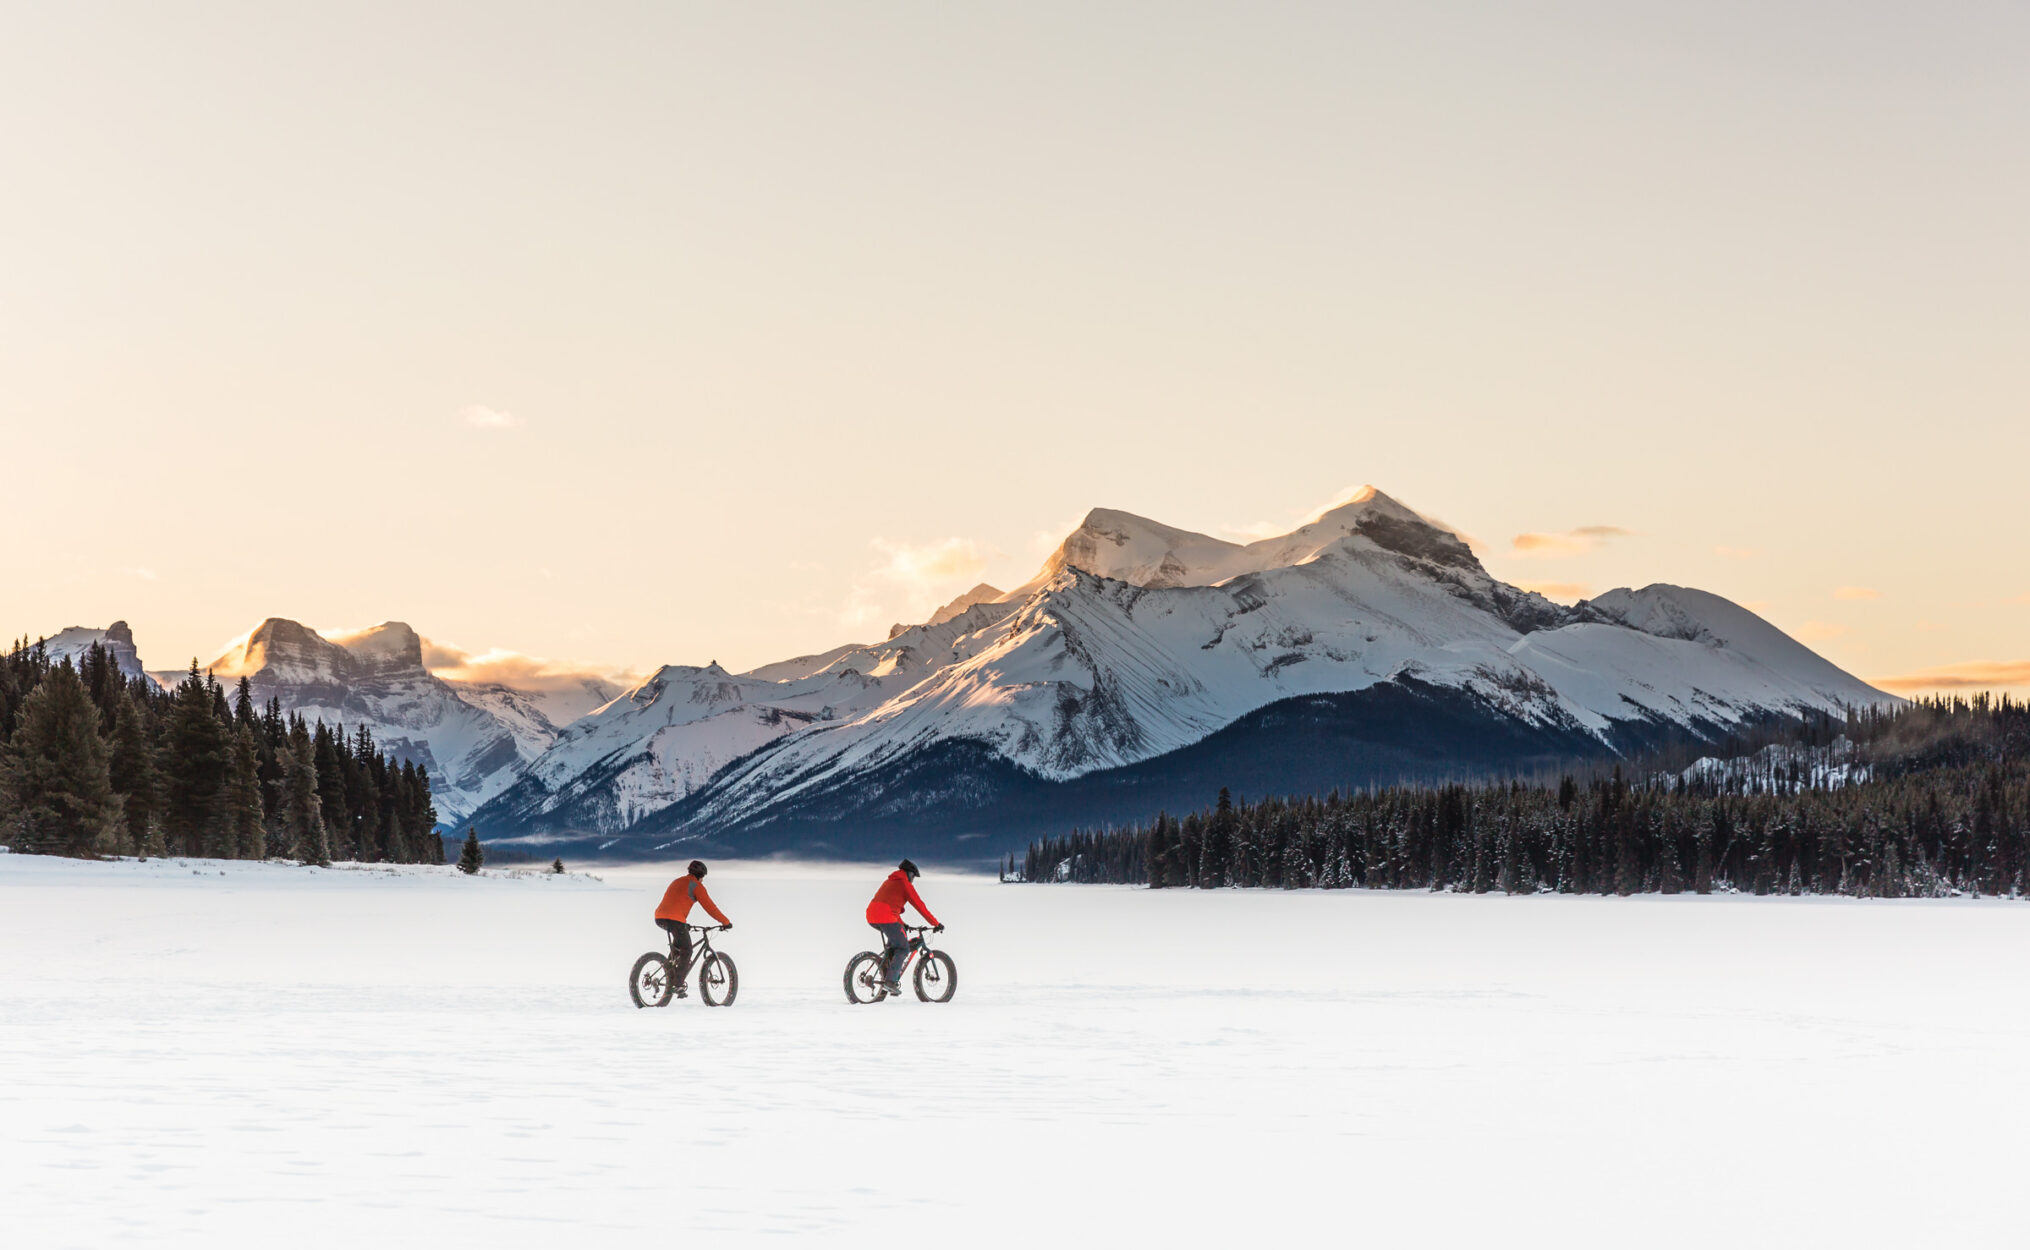 Get Fat: A Very Brief History of Fat Biking in the Canadian Rockies Main Photo